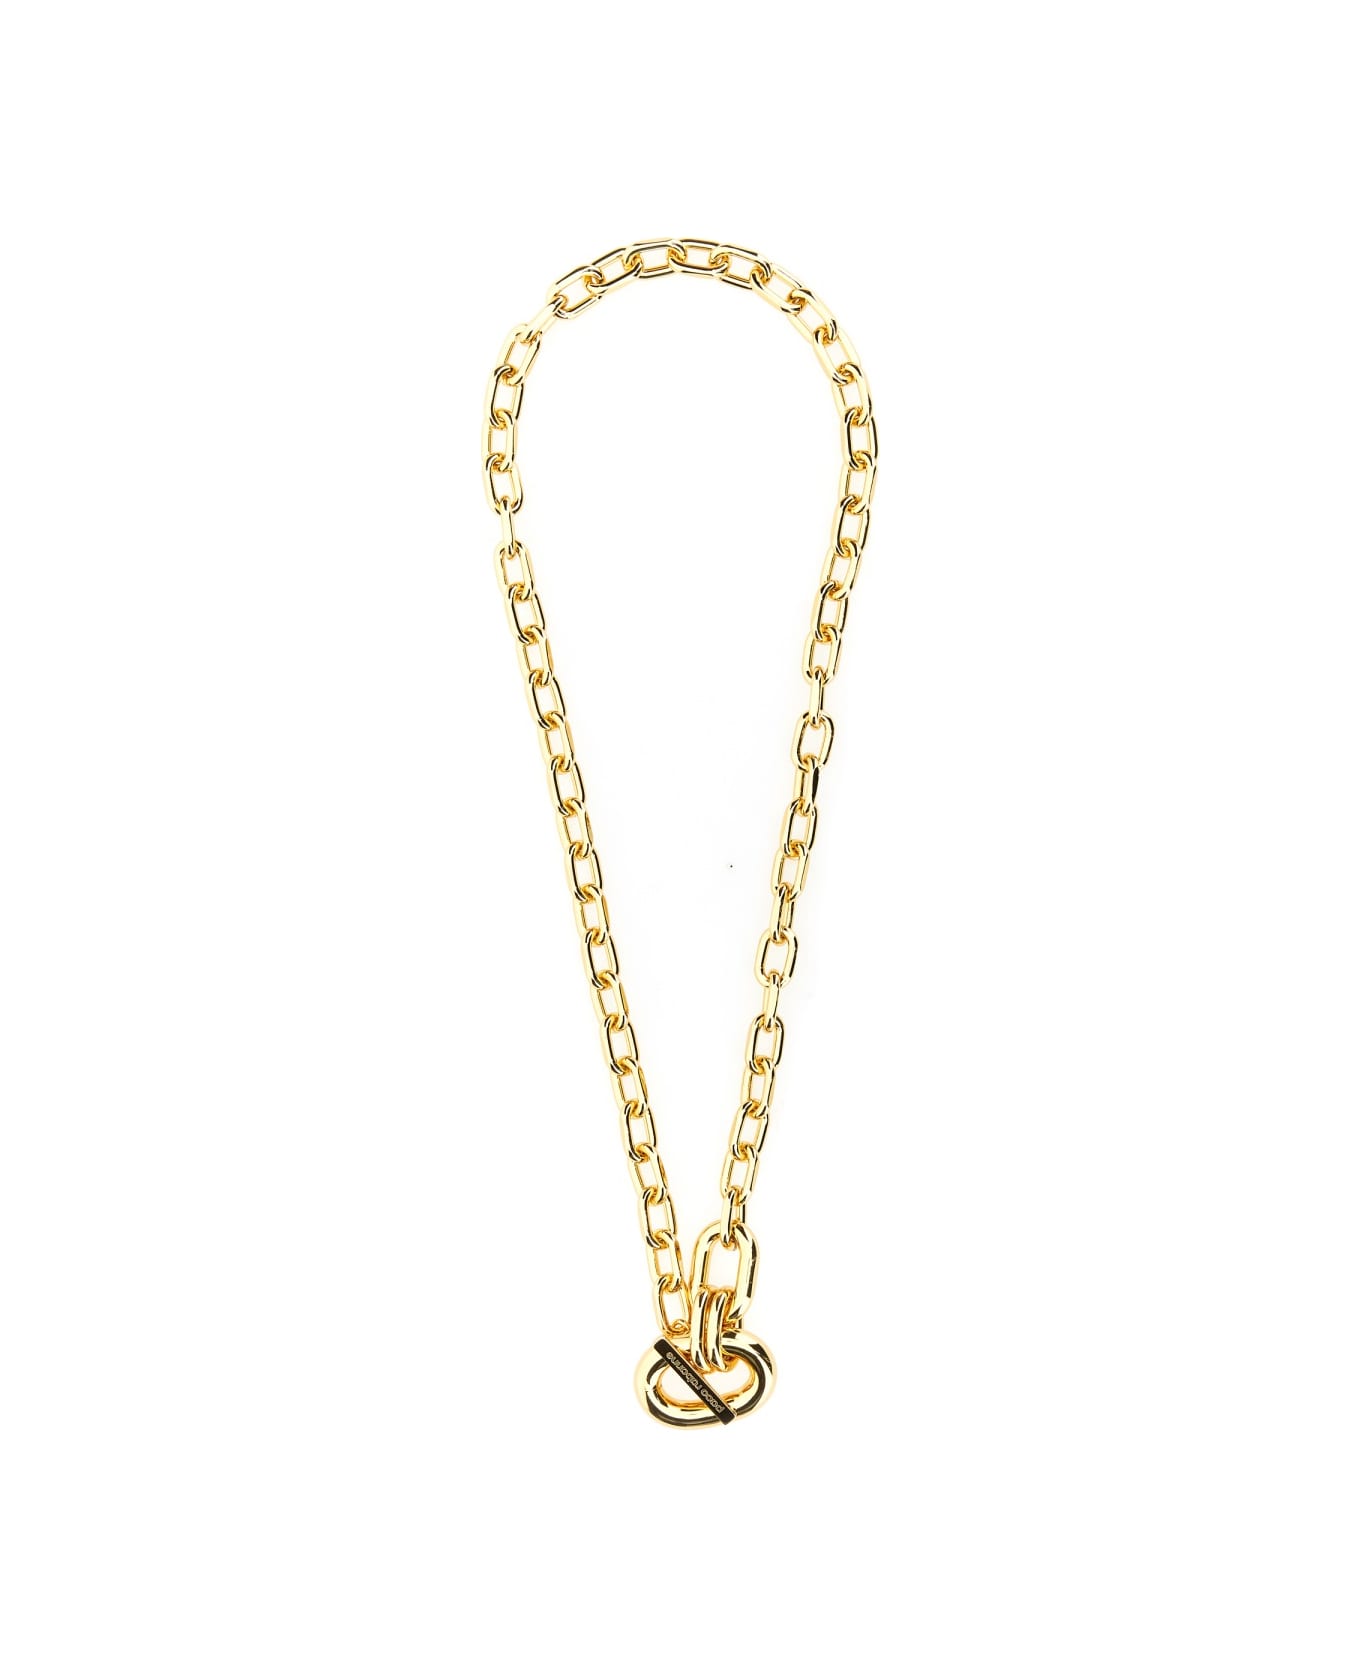 Paco Rabanne Chain Necklace - GOLD ネックレス